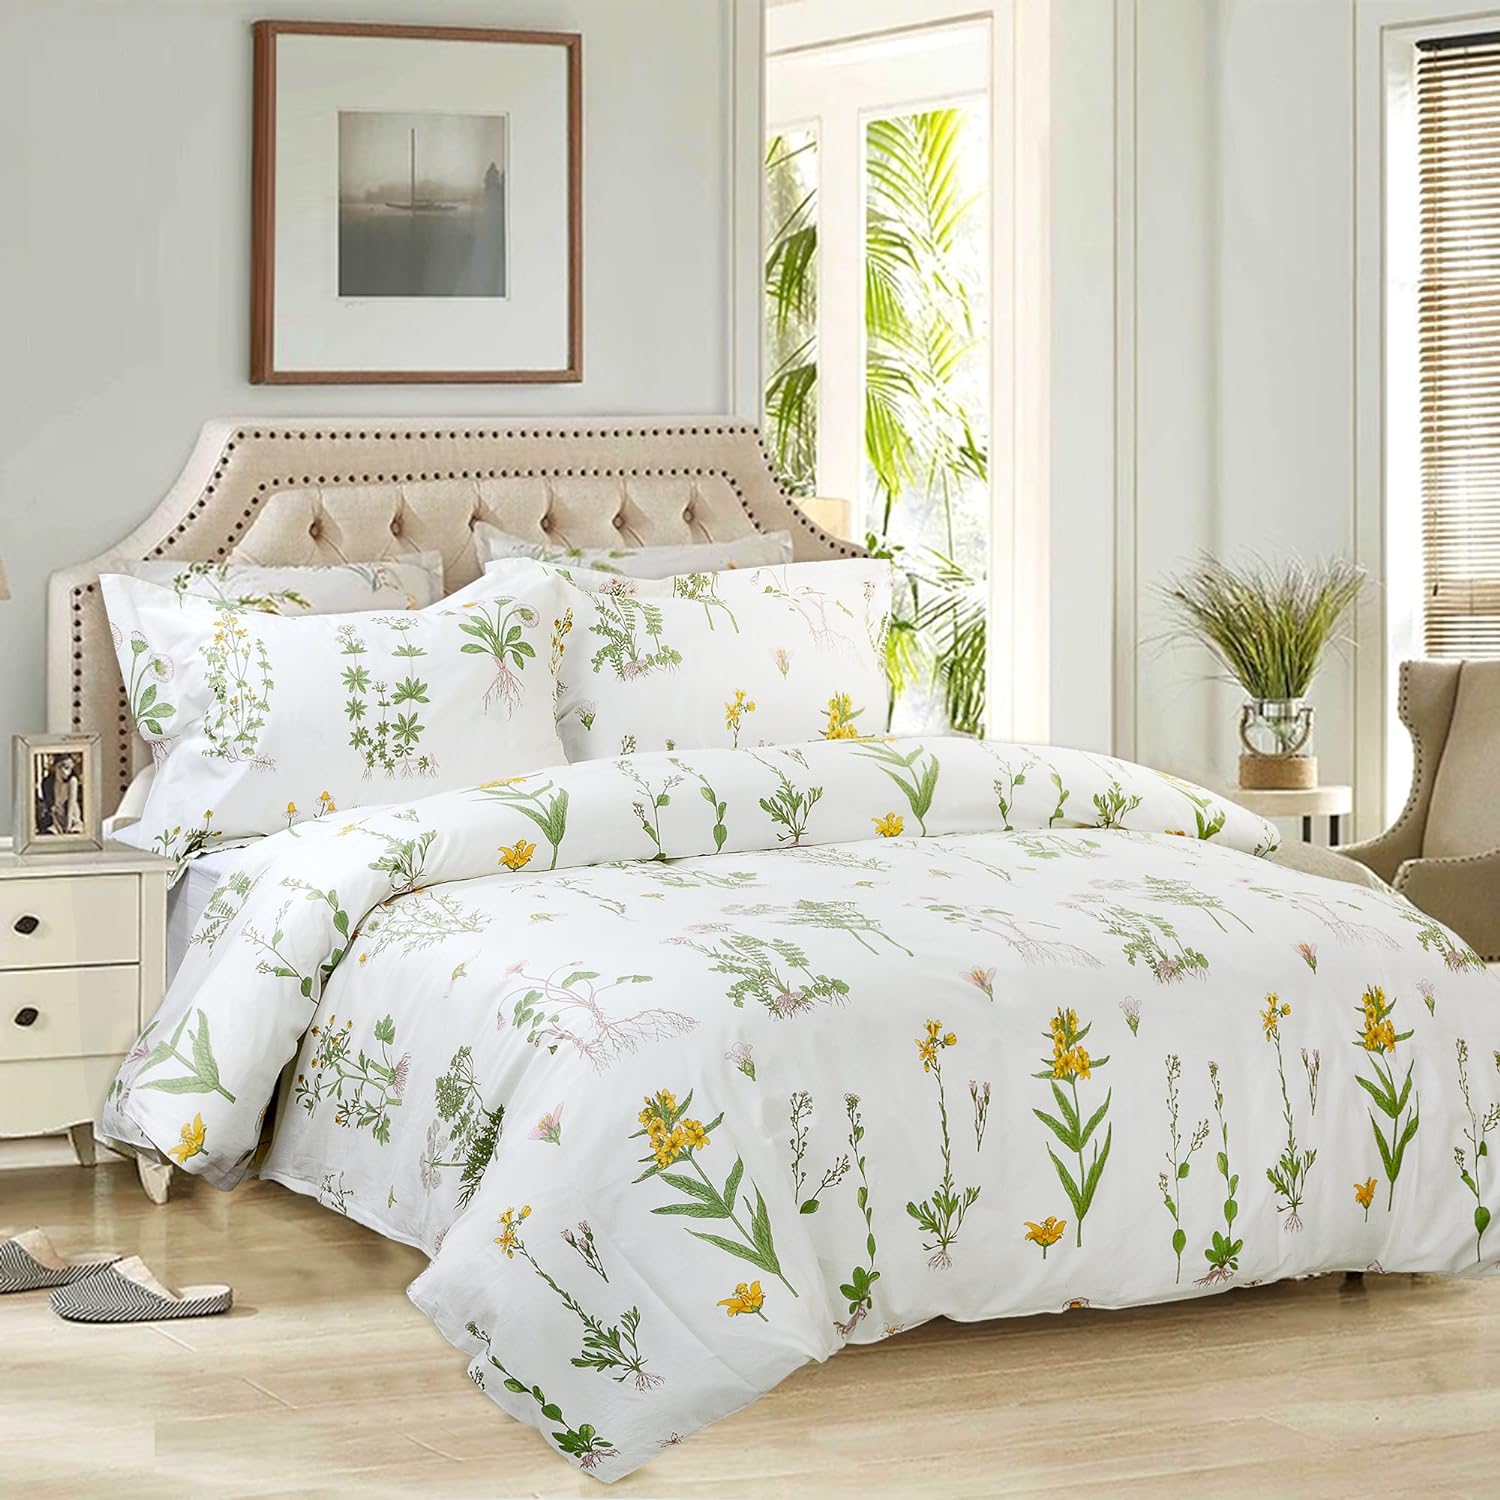 FADFAY Shabby Floral Duvet Cover Set White and Green Cotton Bedding Set with Hidden Zipper Closure 3 Pieces, 1duvet Cover & 2pillowcases (Twin Size, Simple Style)